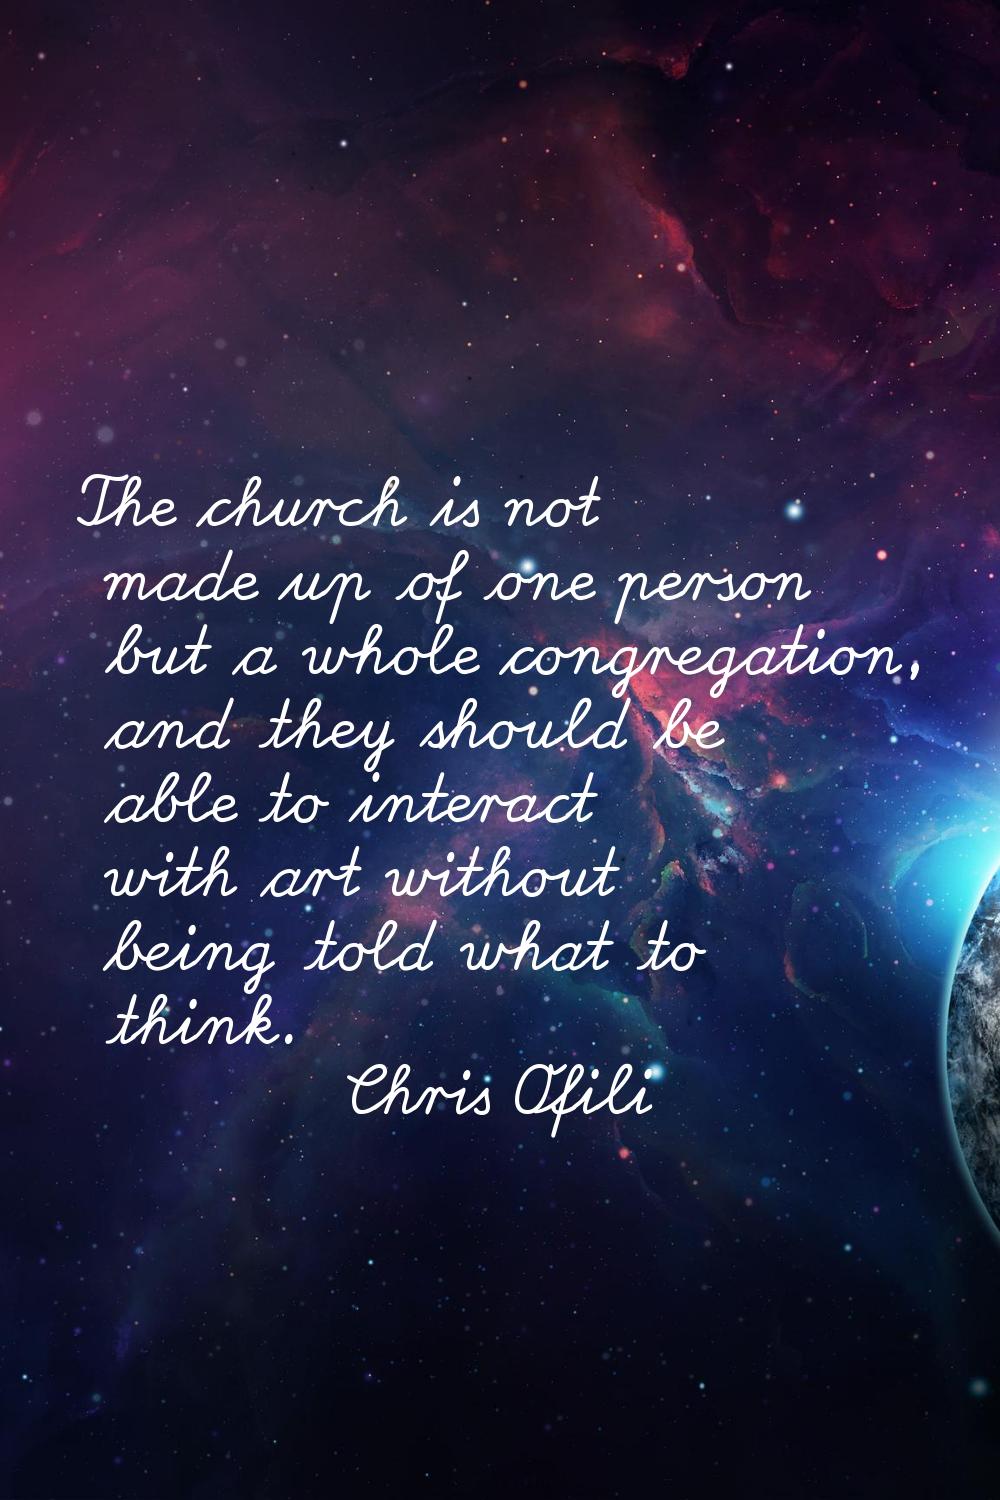 The church is not made up of one person but a whole congregation, and they should be able to intera